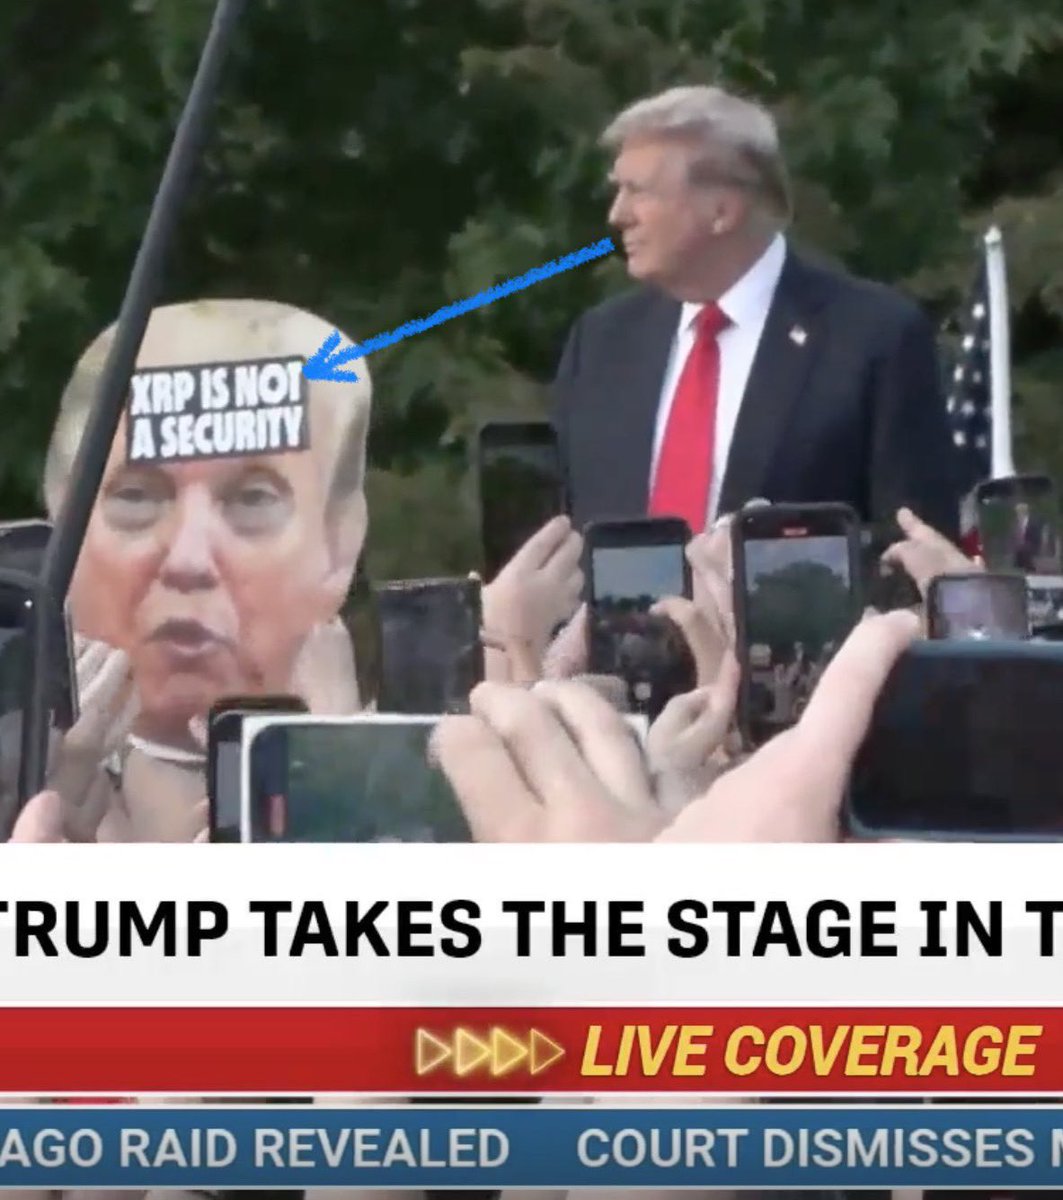 Someone at a Trump-rally had a „#XRP IS NOT A SECURITY“ sign 😄